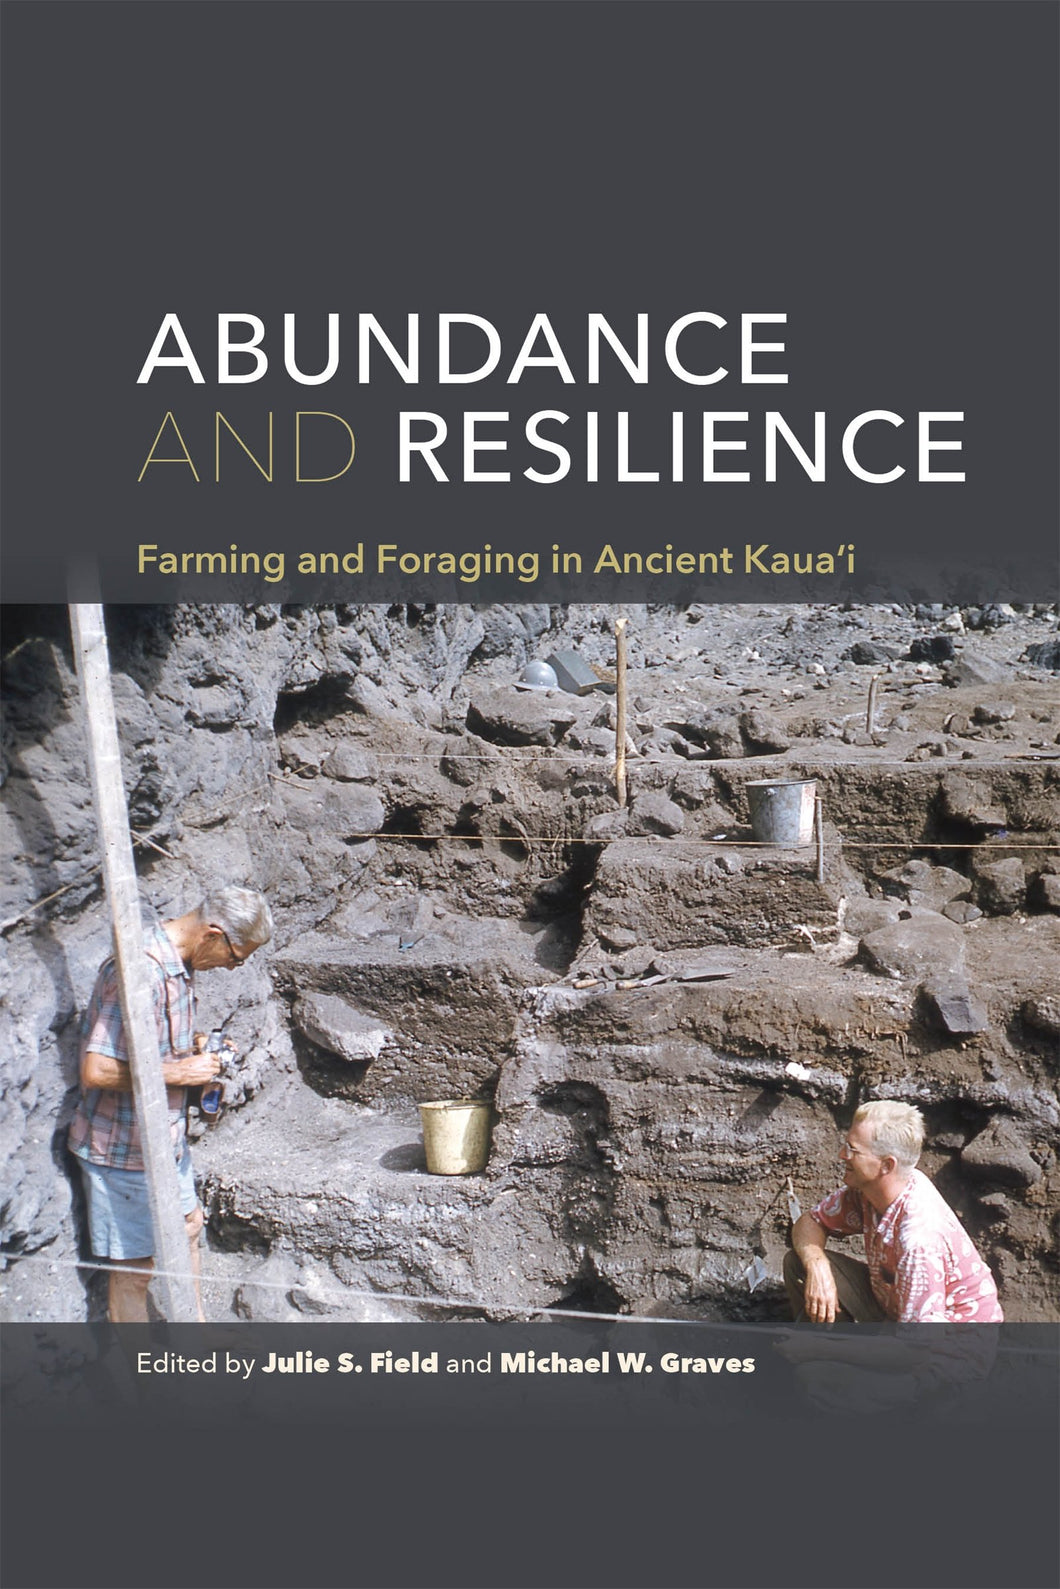 Abundance and Resilience: Farming and Foraging in Ancient Kaua‘i by Julie S. Field (editor), Michael W. Graves (editor)